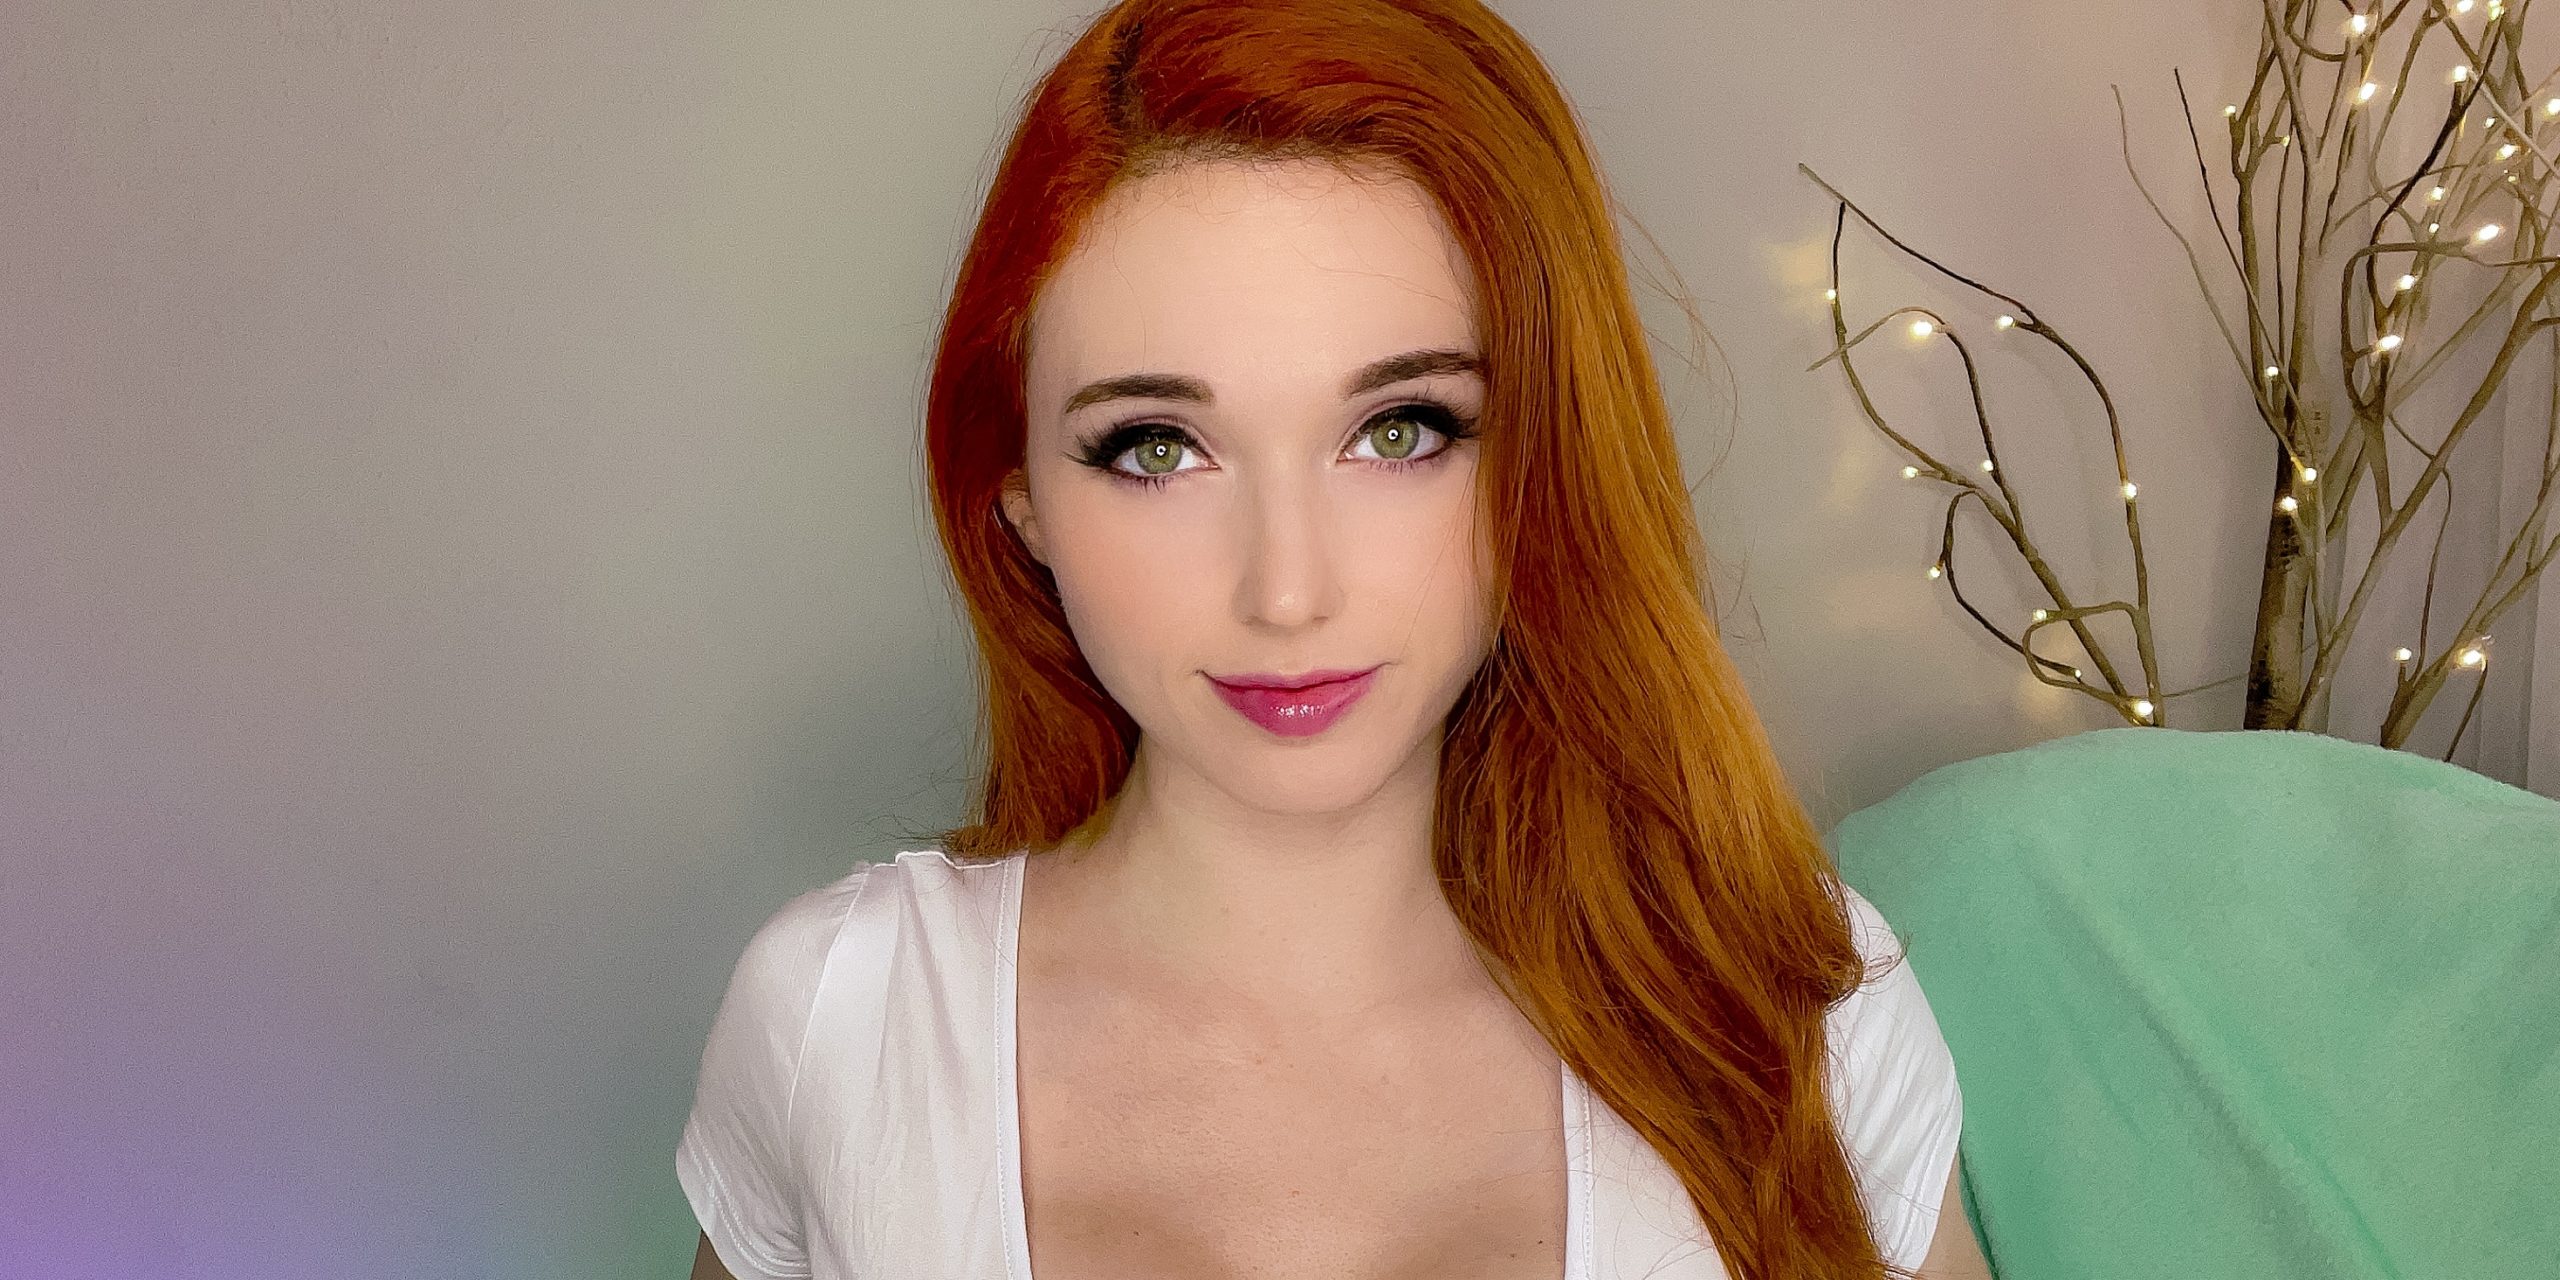 Amouranth Twitch